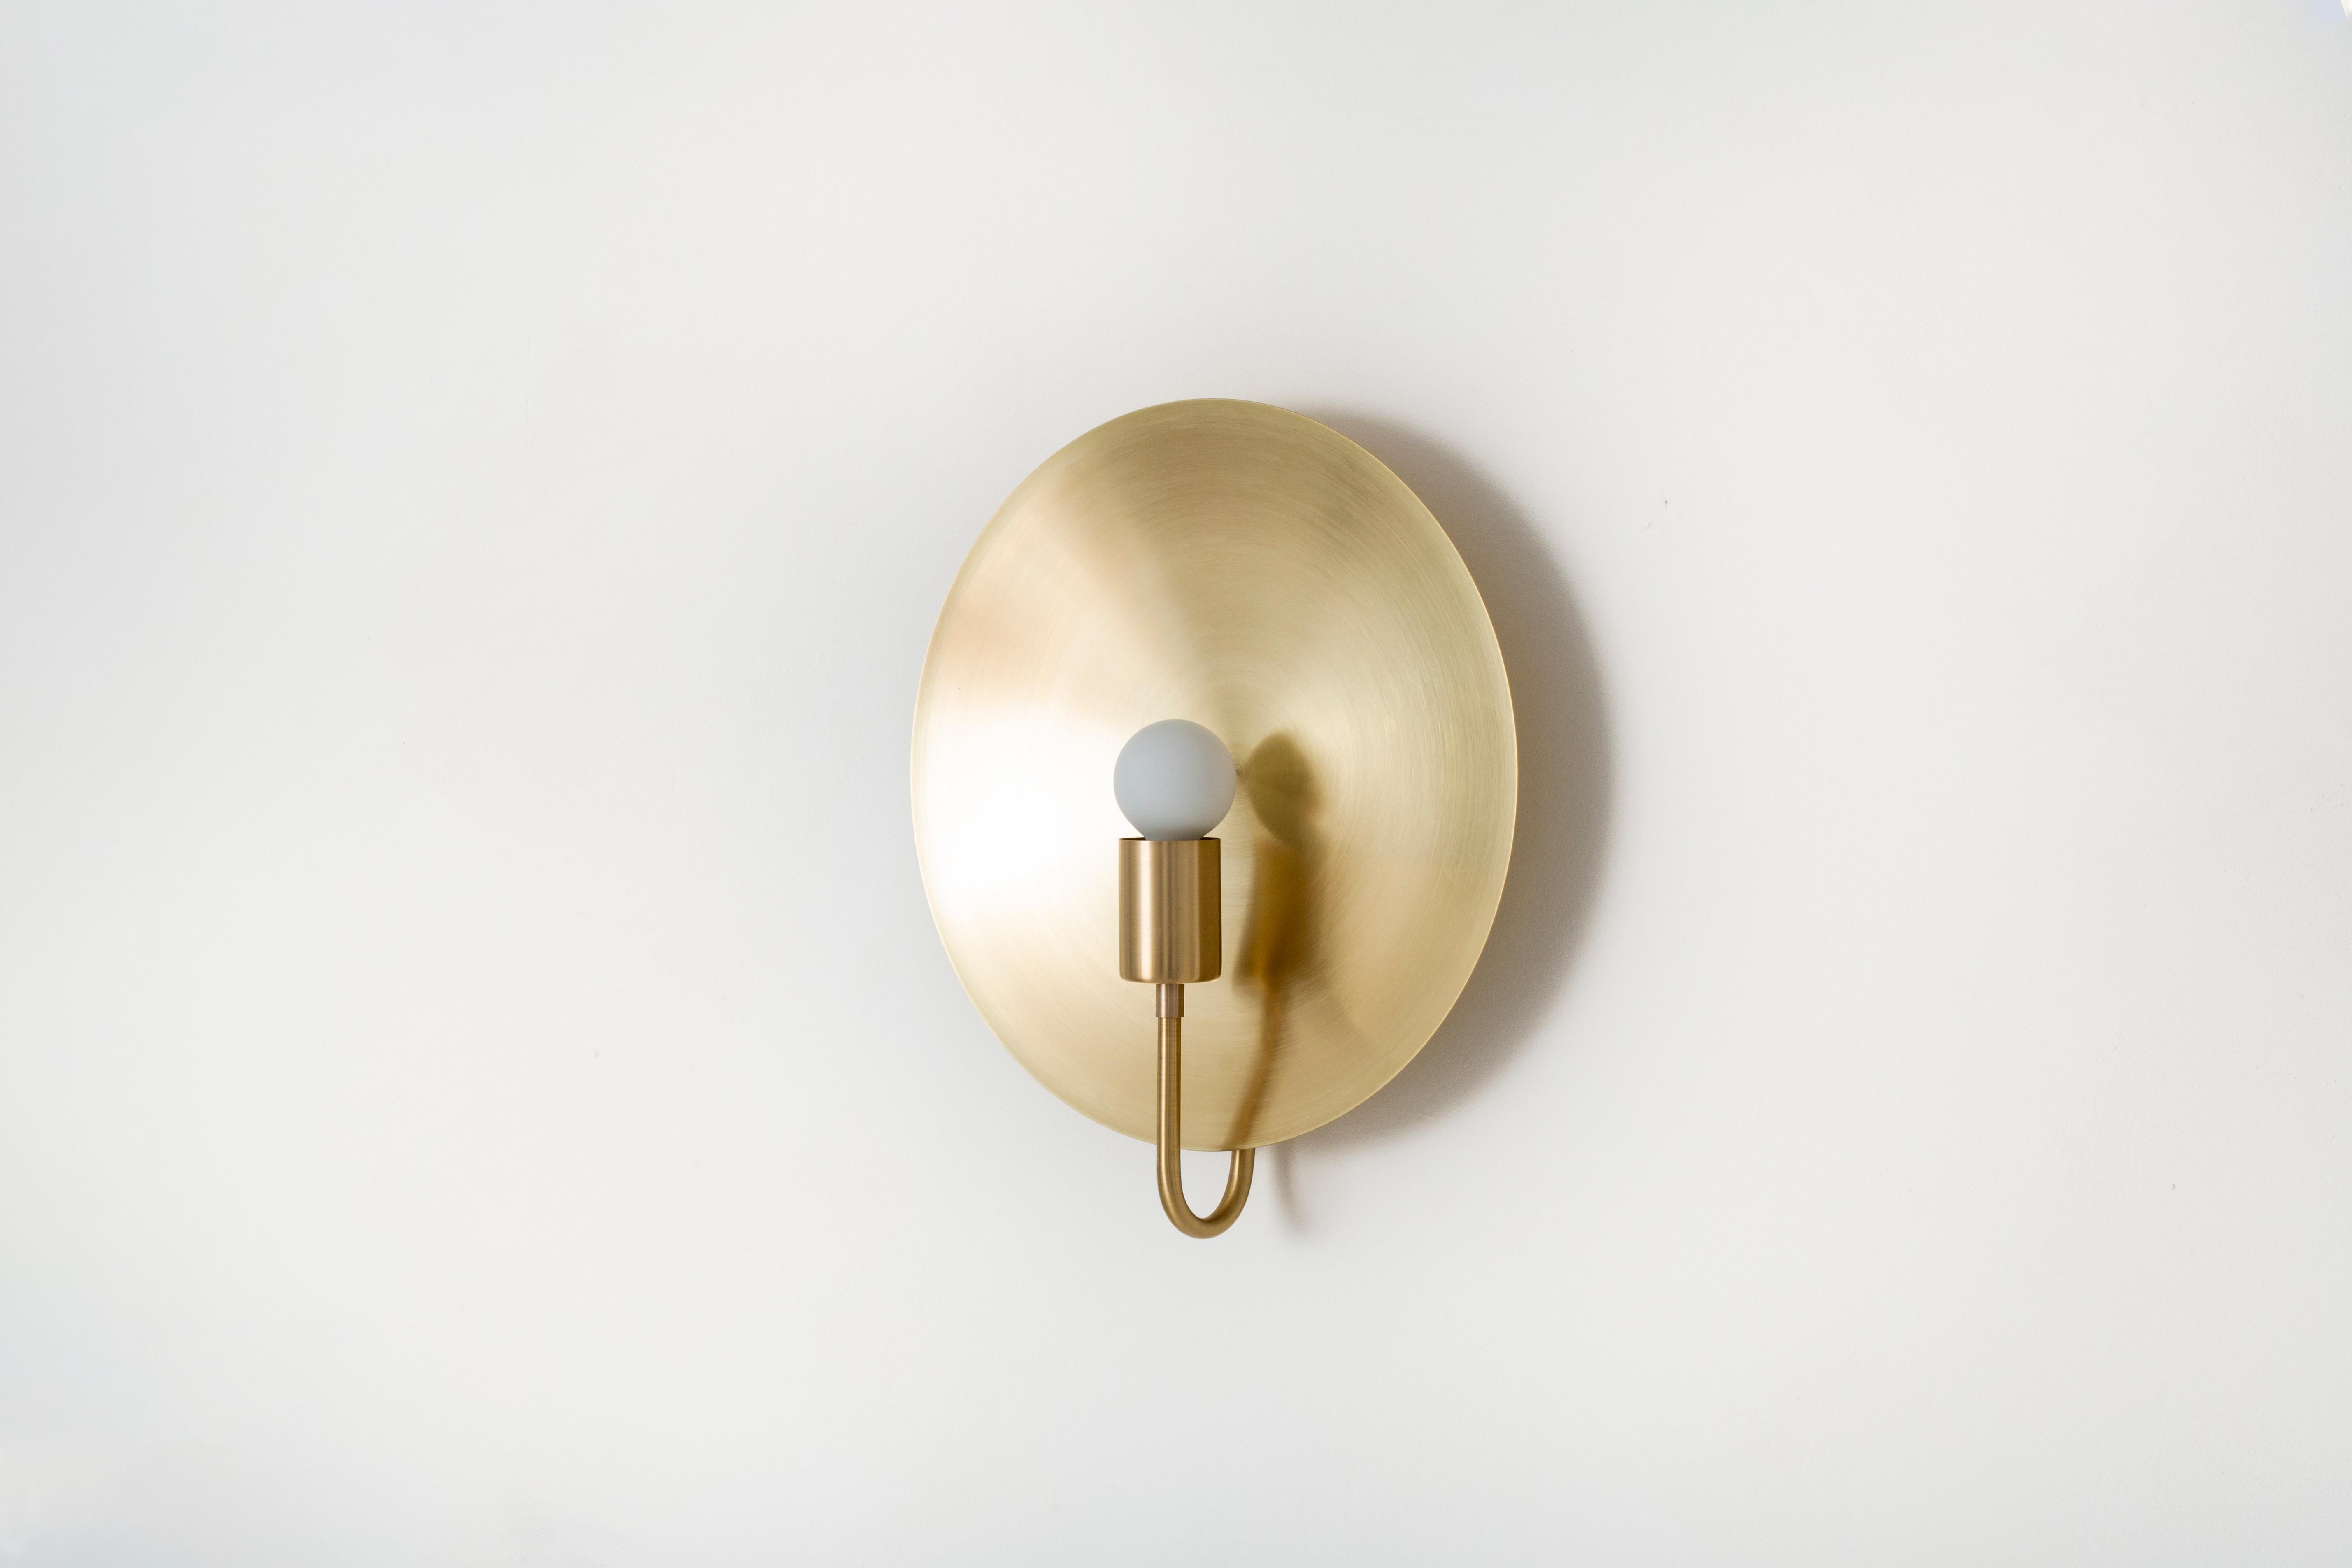 American Classical Workstead Helios ADA Sconce in Hewn Brass For Sale